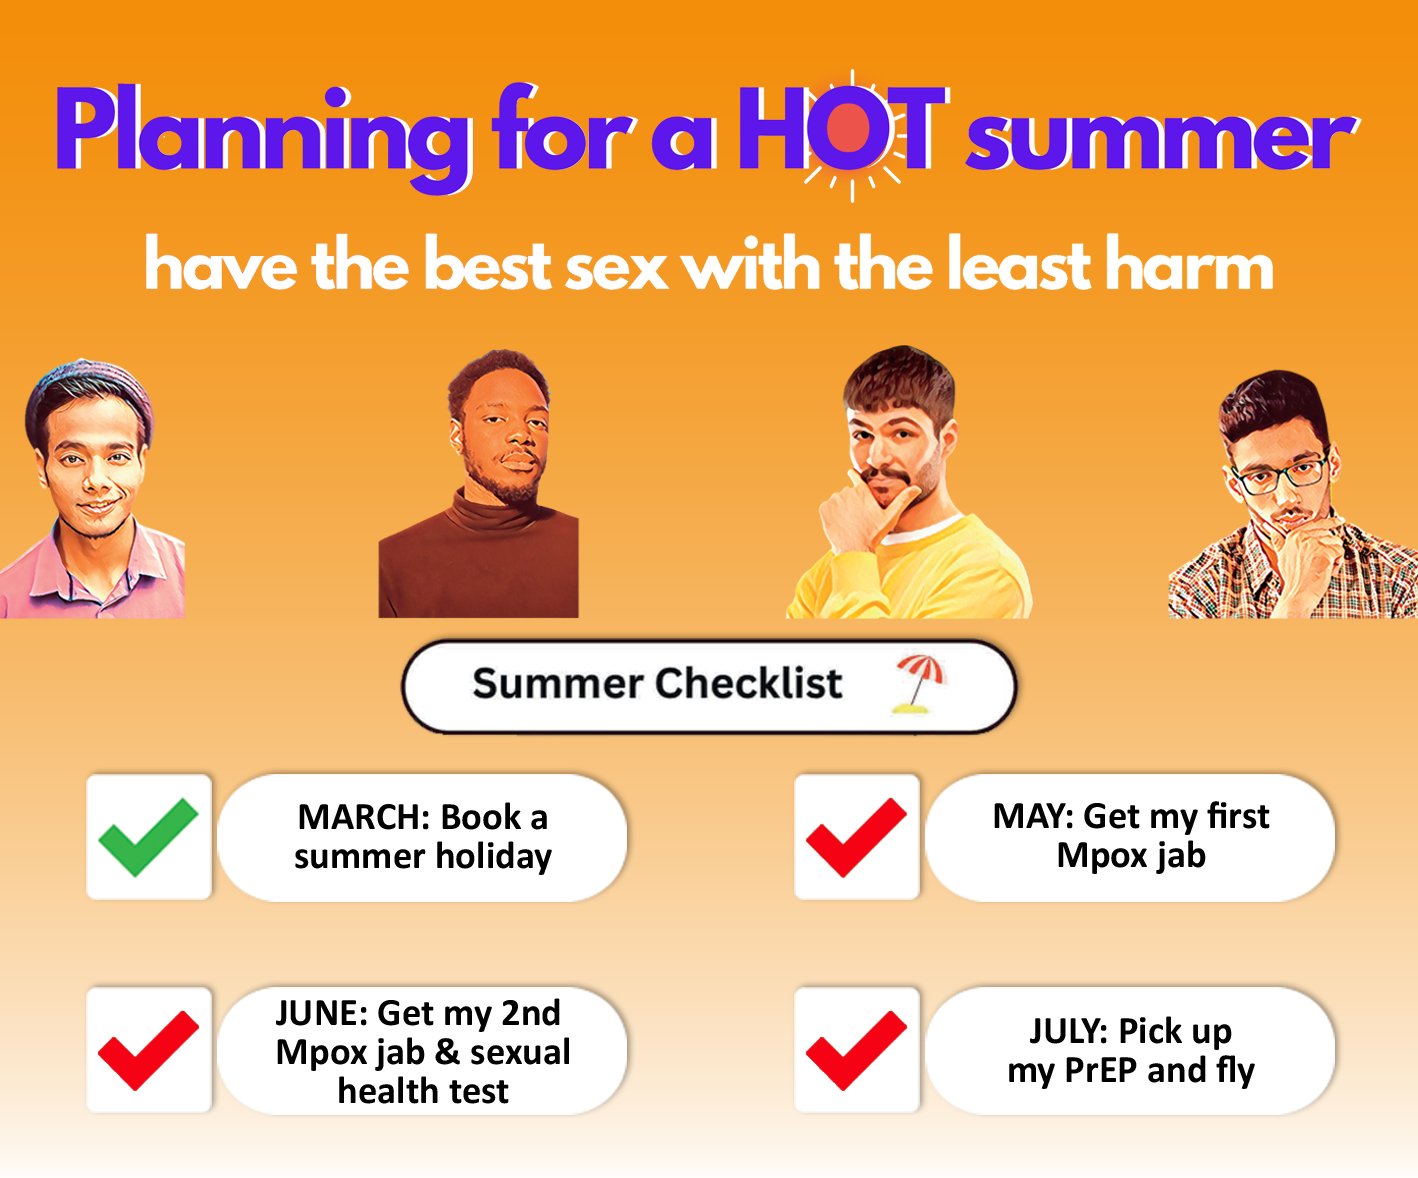 Planning for a hot summer?